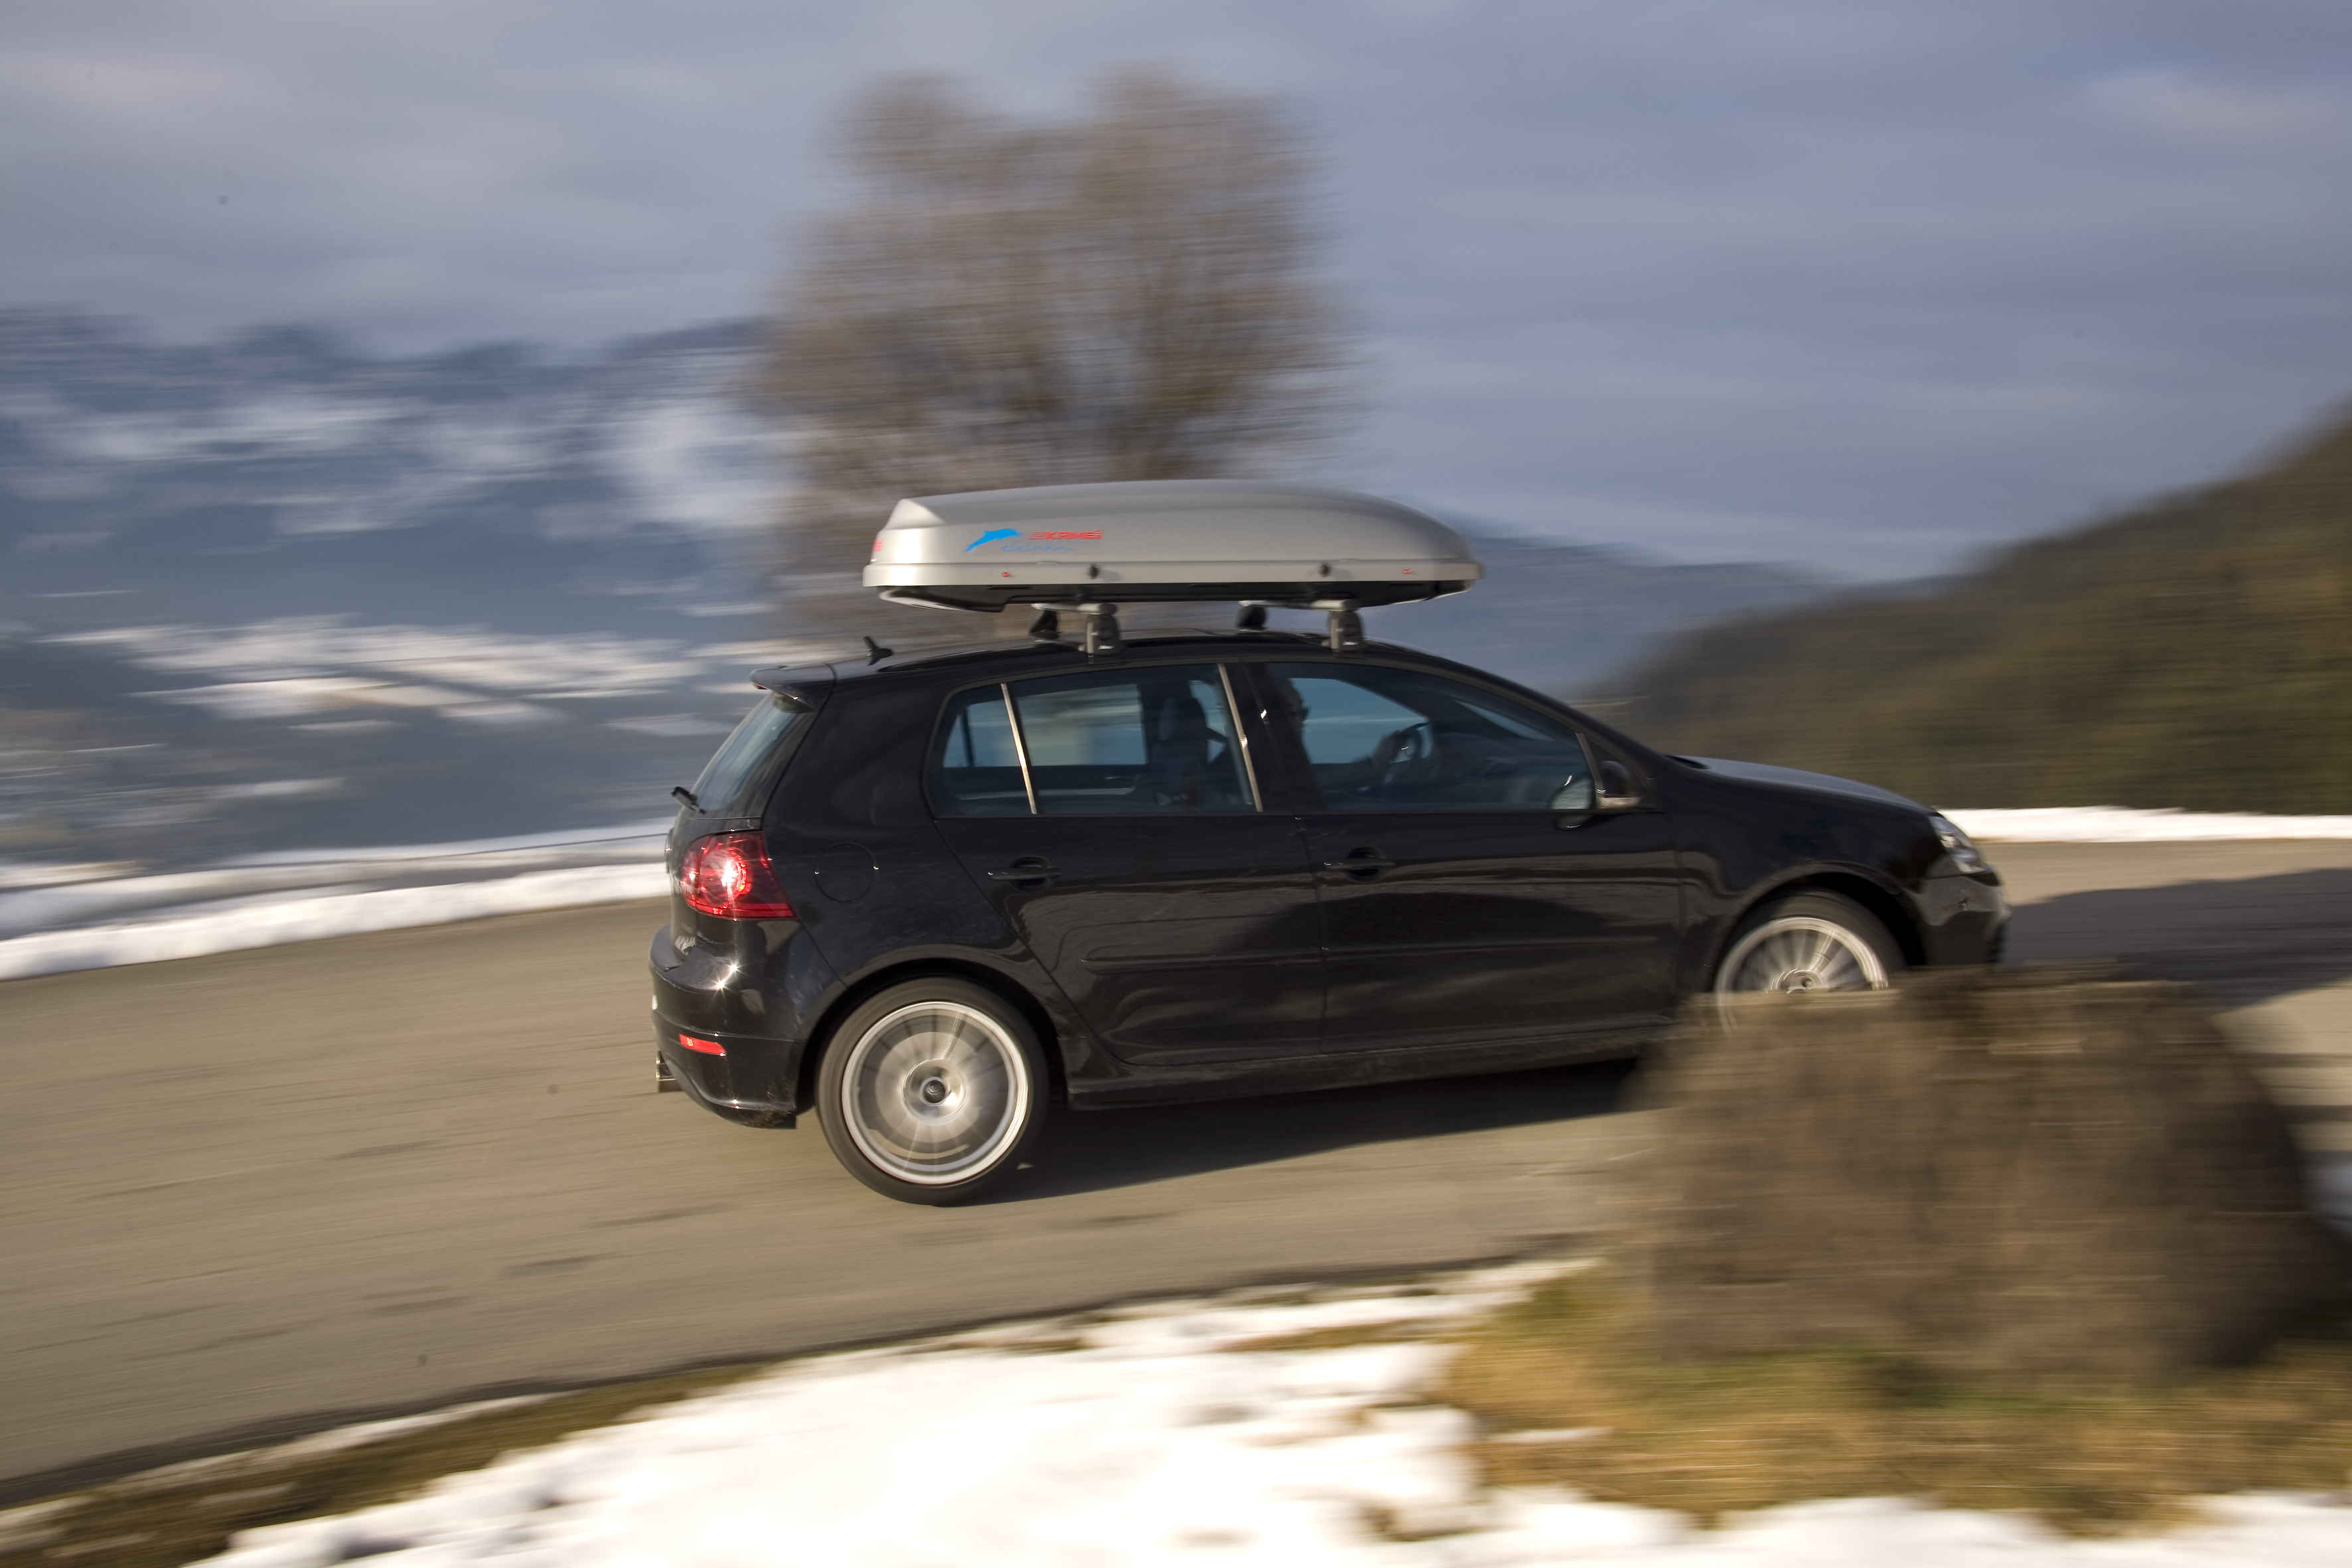 Skiing by car - how to safely transport equipment? – main image